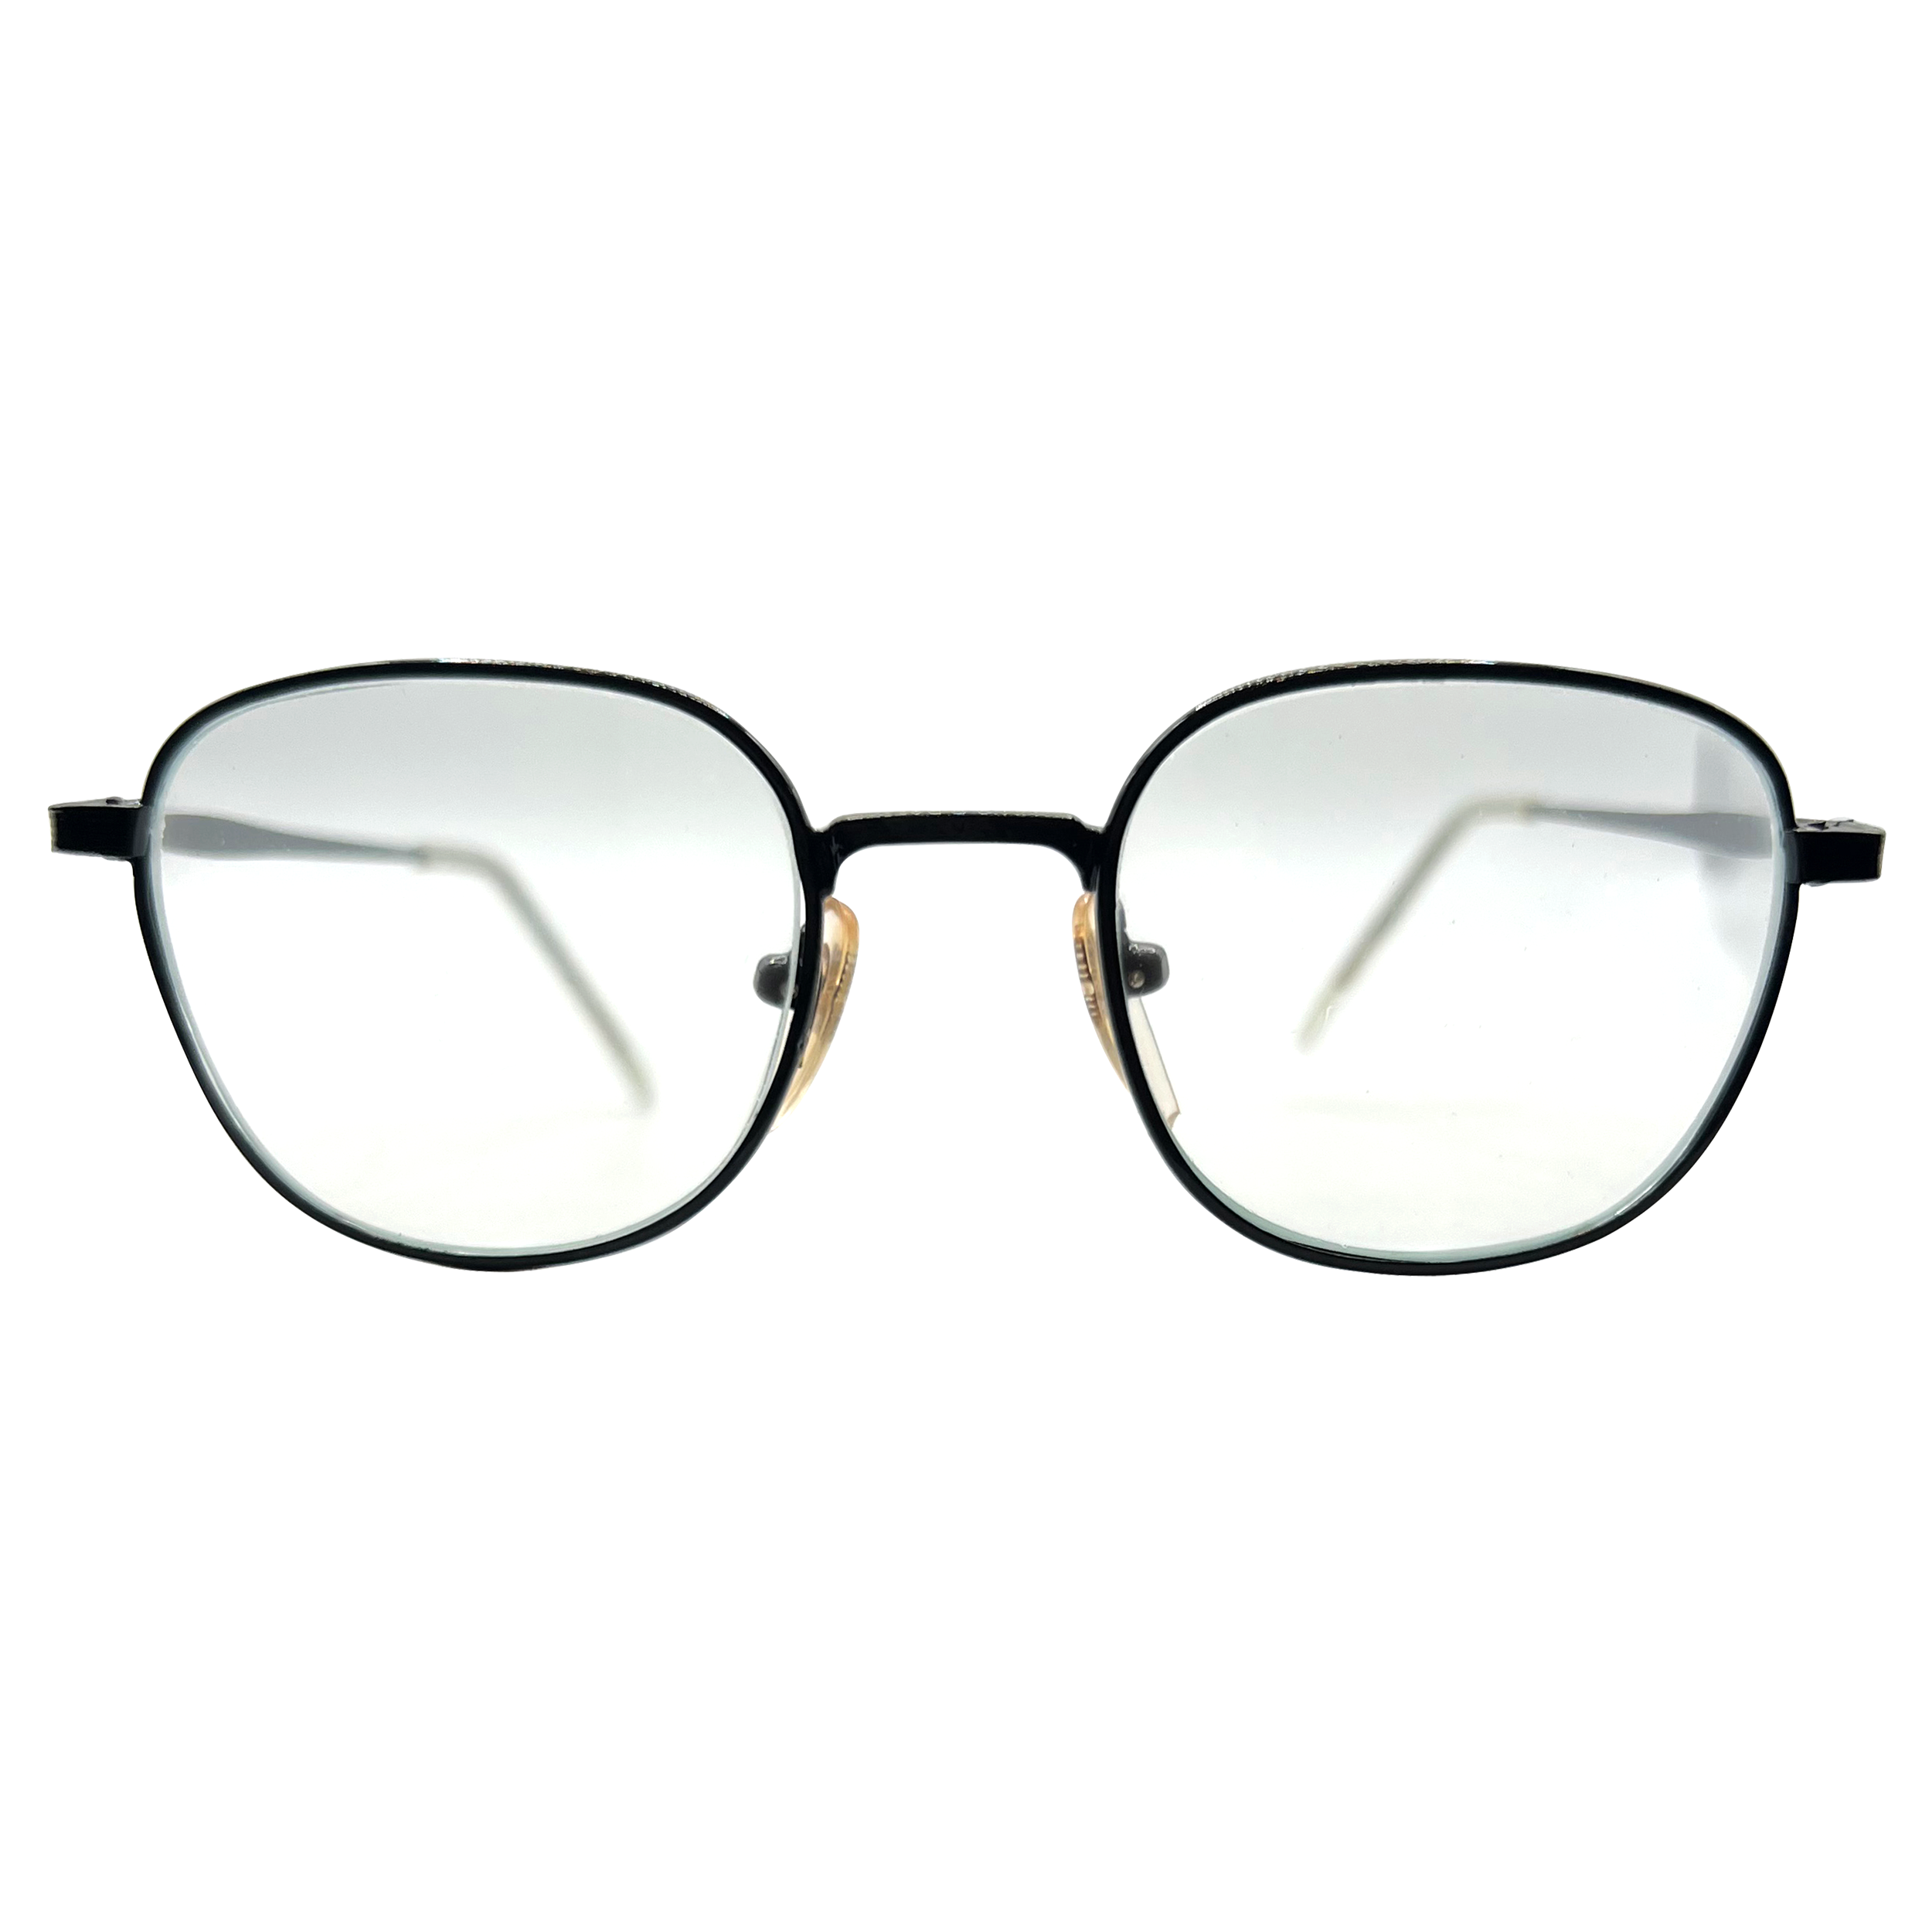 BREZLY Clear/Black